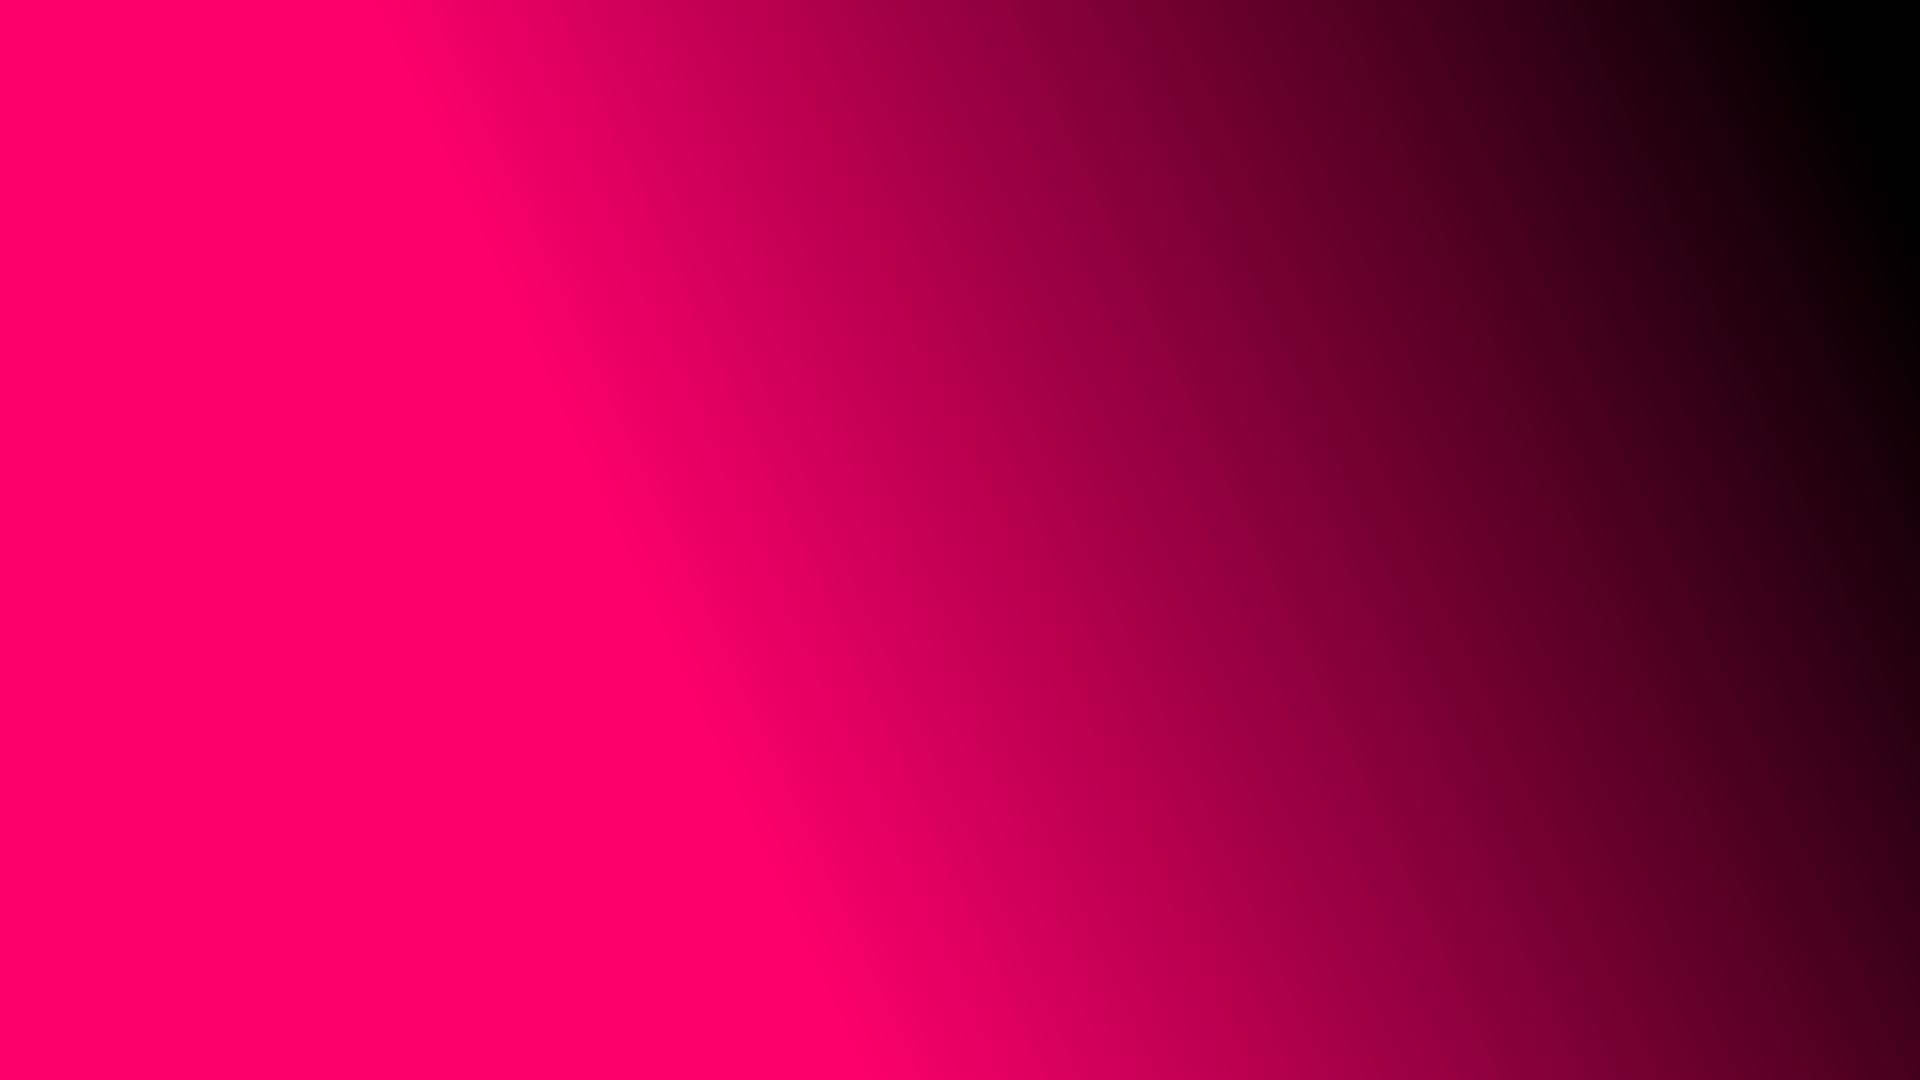 Black And Pink Aesthetic Linear Gradient